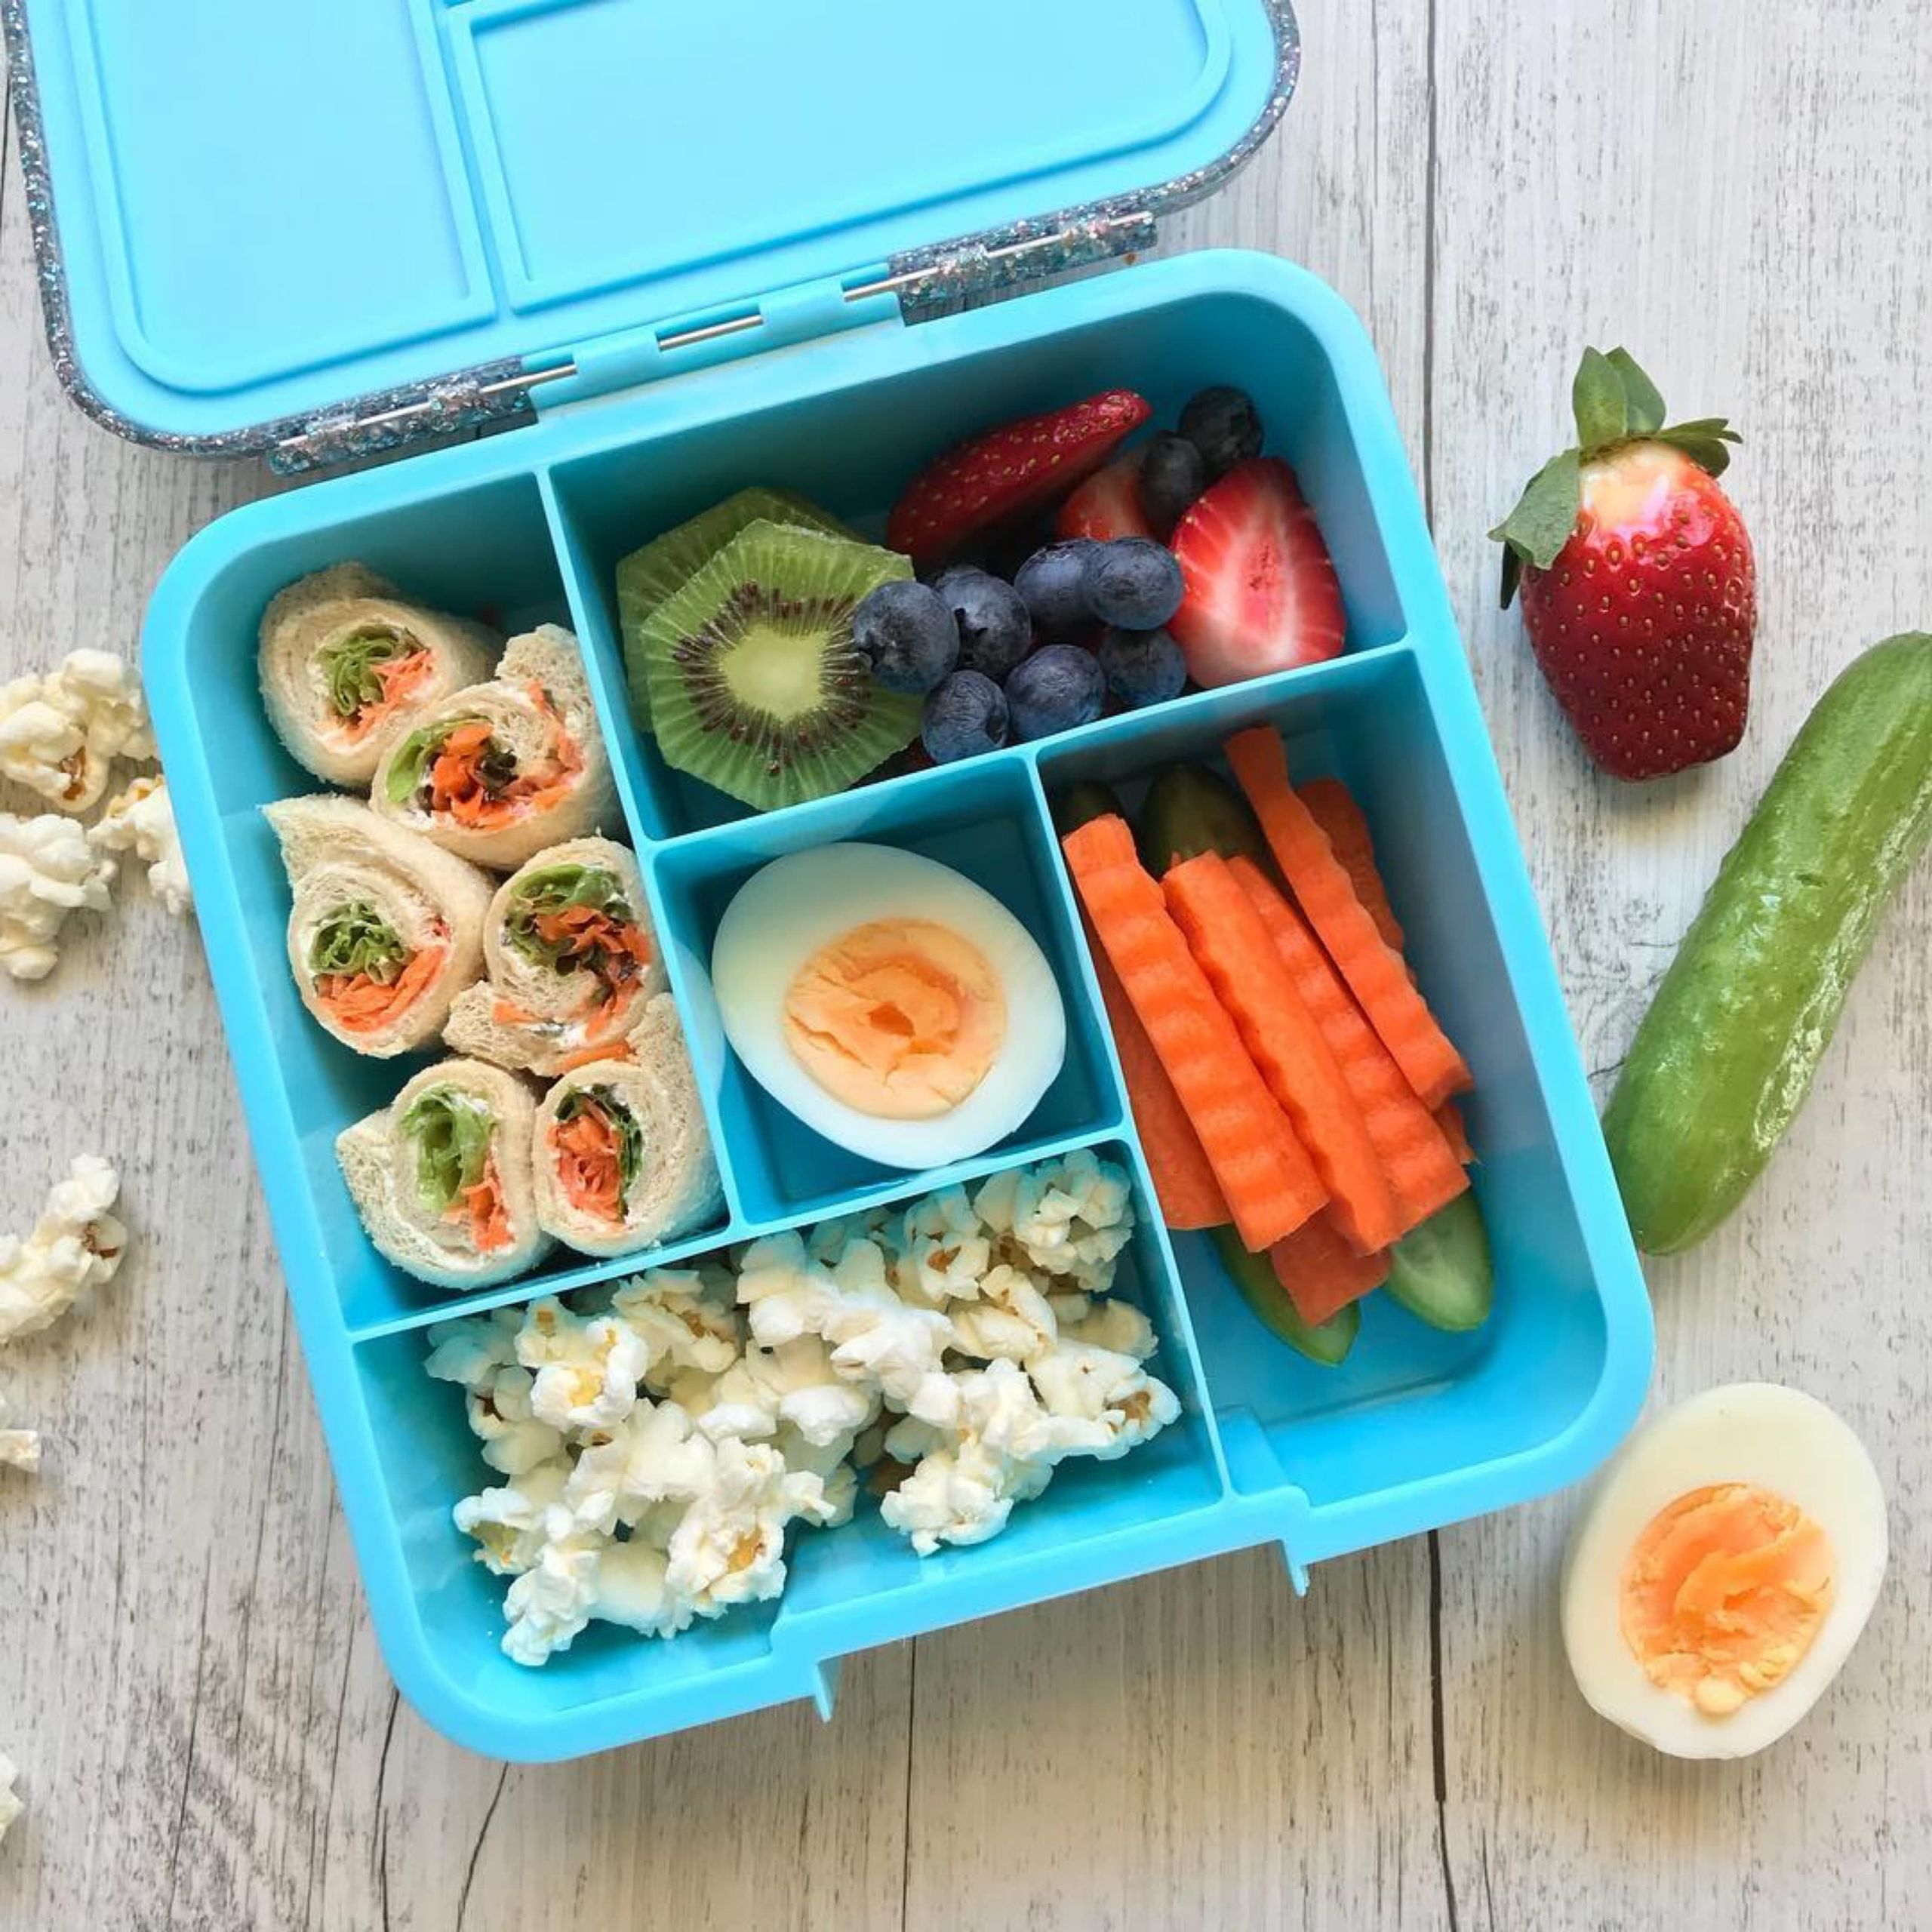 Easy Healthy School Lunches
 Easy School Lunch Ideas Your Kids Will Love to Eat